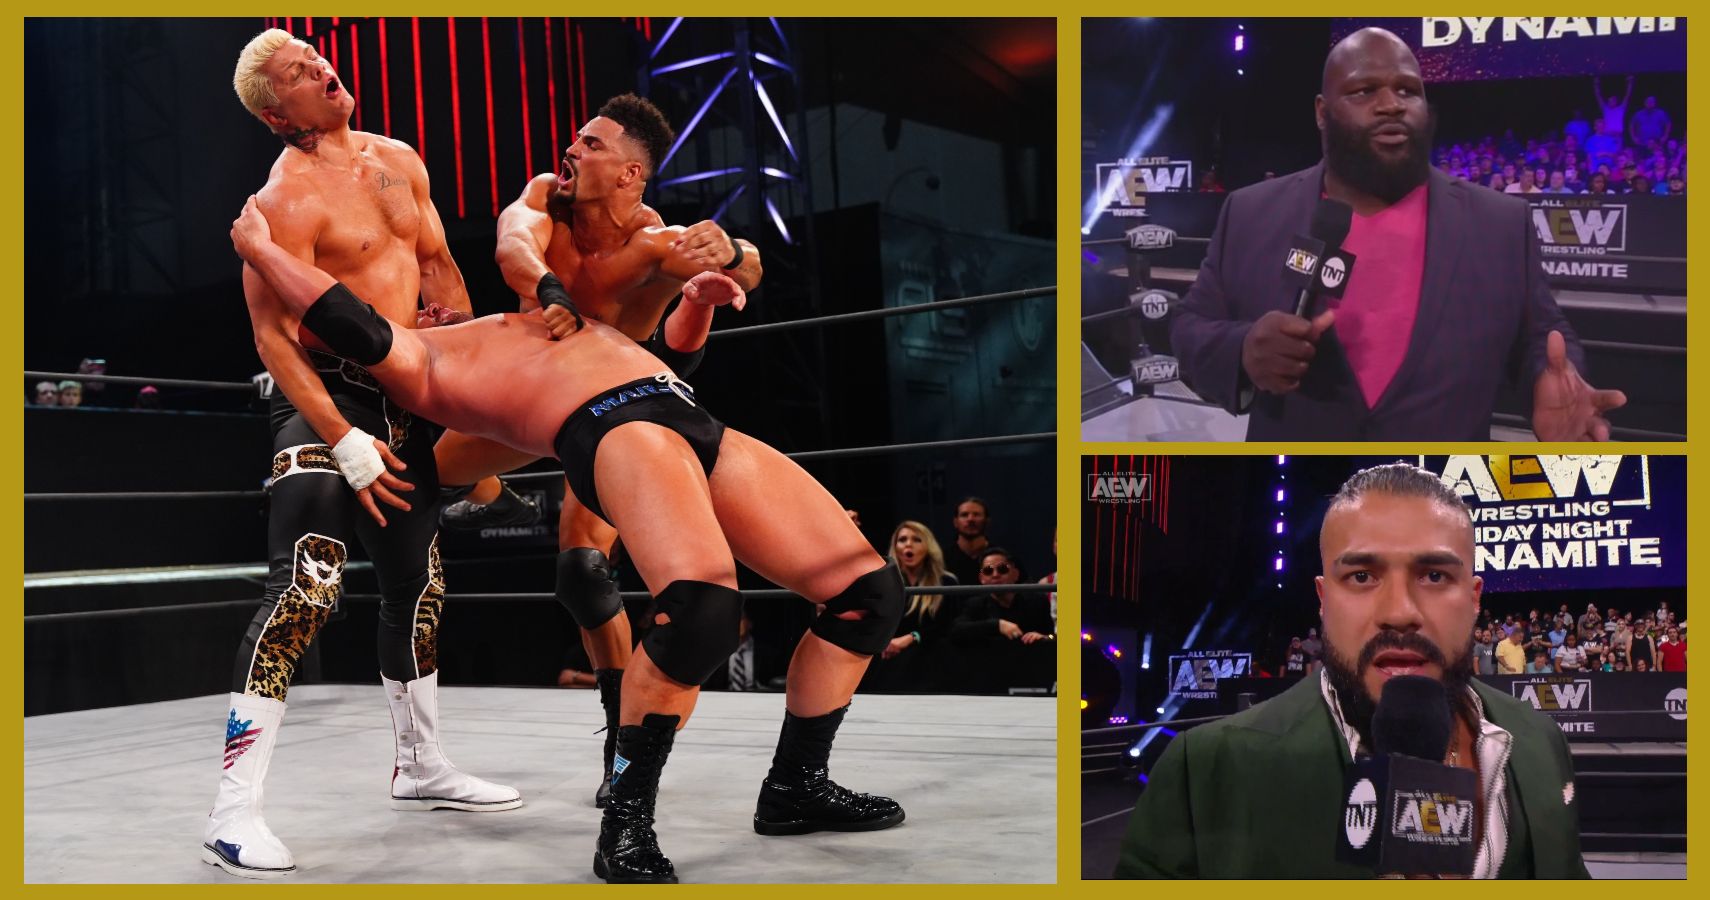 AEW Dynamite 6/4/2021 featuring Anthony Ogogo, Cody Rhodes, as well the debut of former NXT Champion Andrade El Idolo, and WWE Hall Of Famer teasing an in-ring return